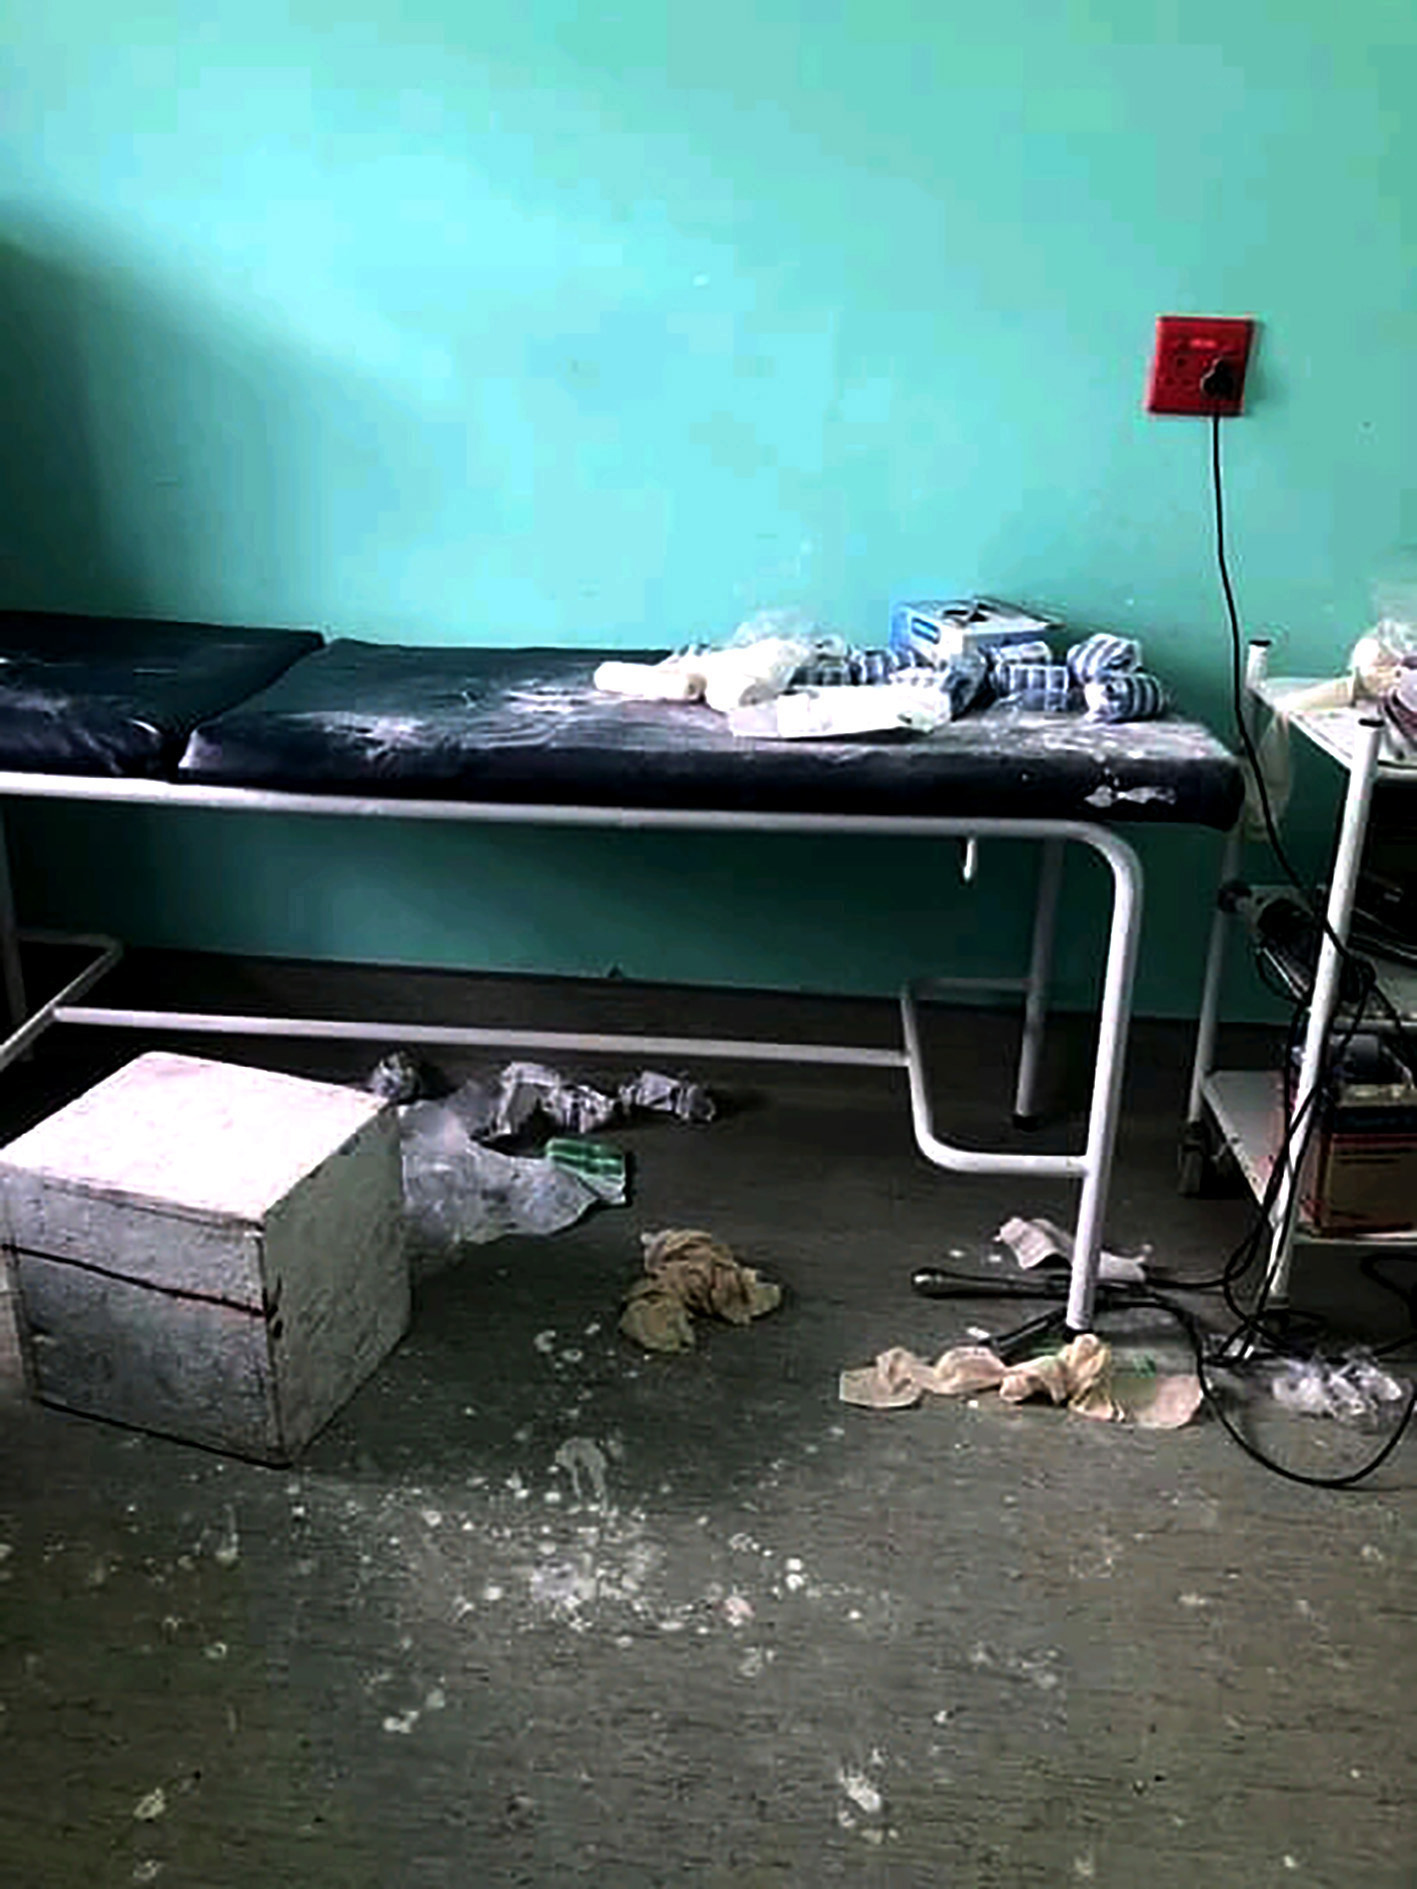 A dirty and cluttered ward at the All Saints Hospitals in the Eastern Cape.